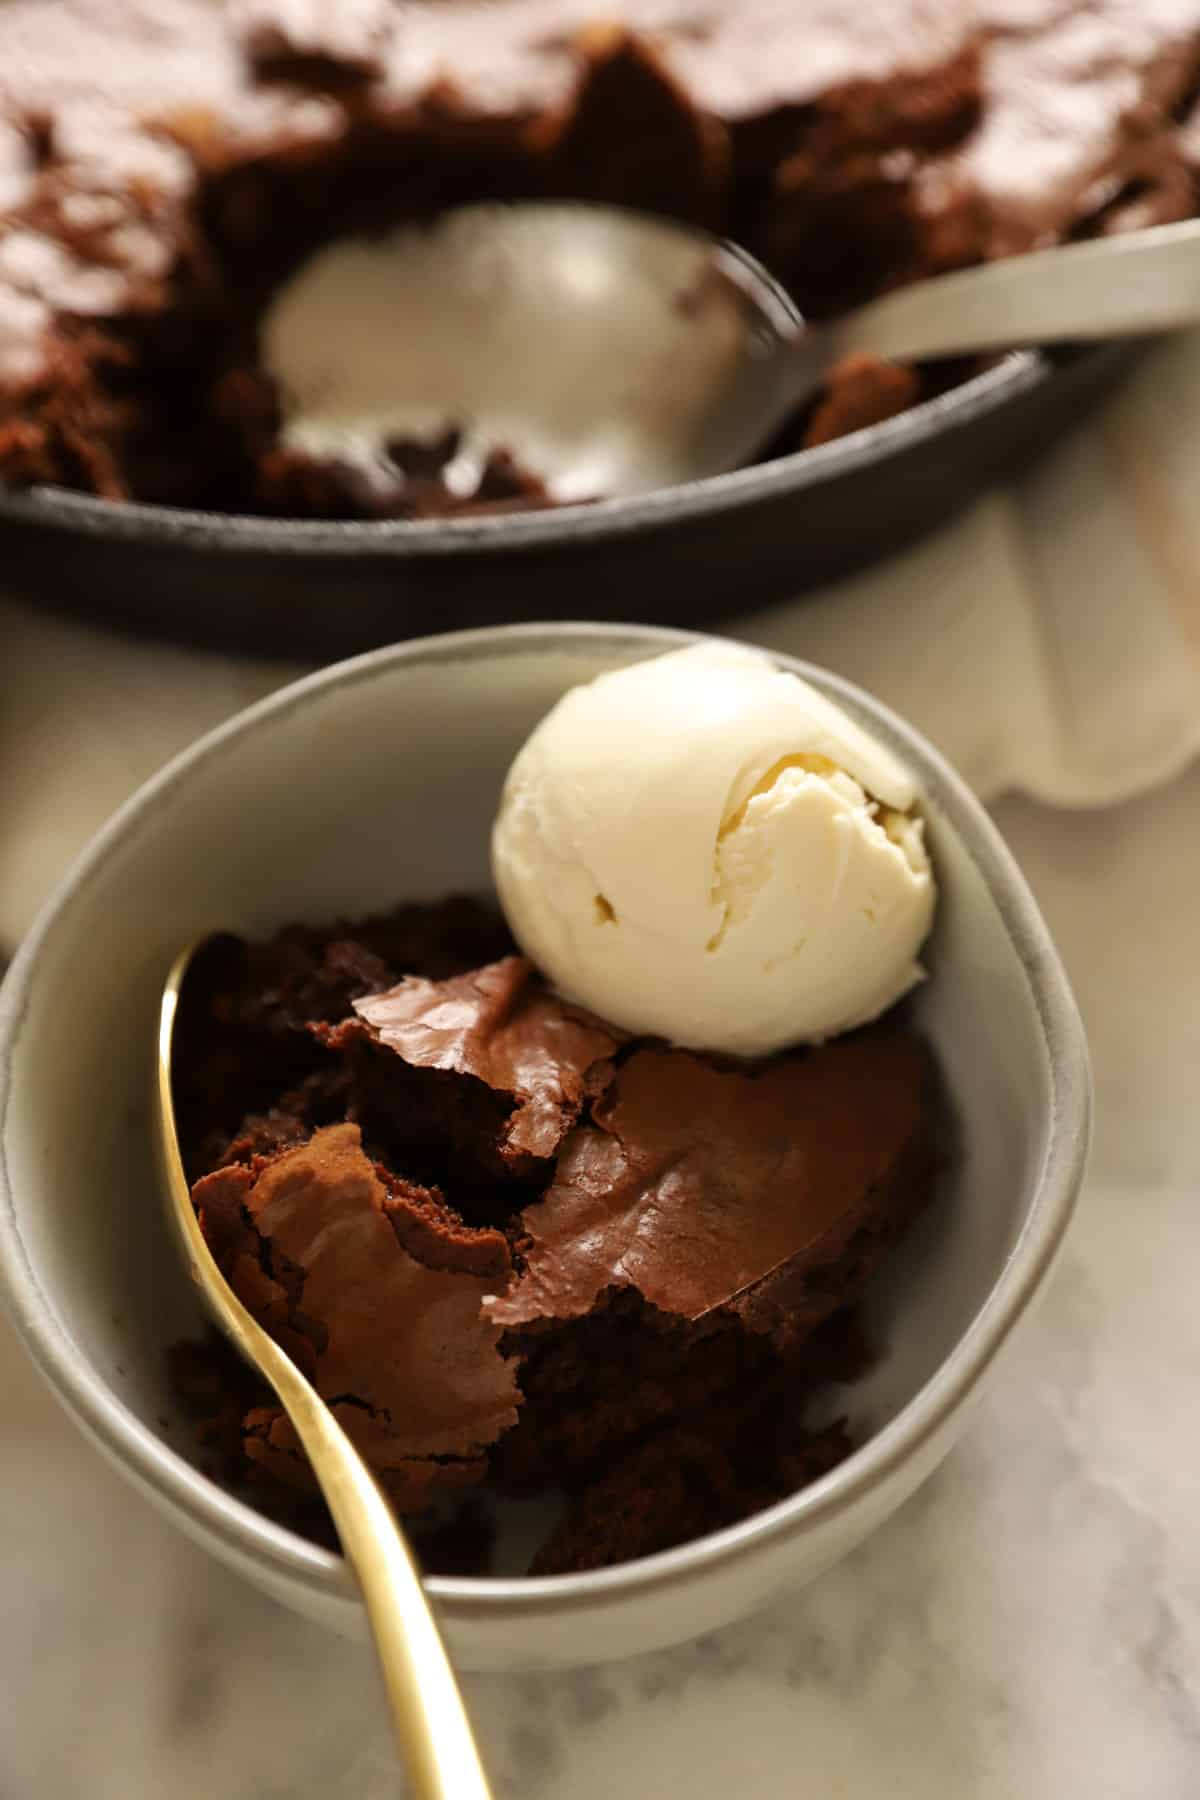 a bowl with chocolate cake and ice cream served in it